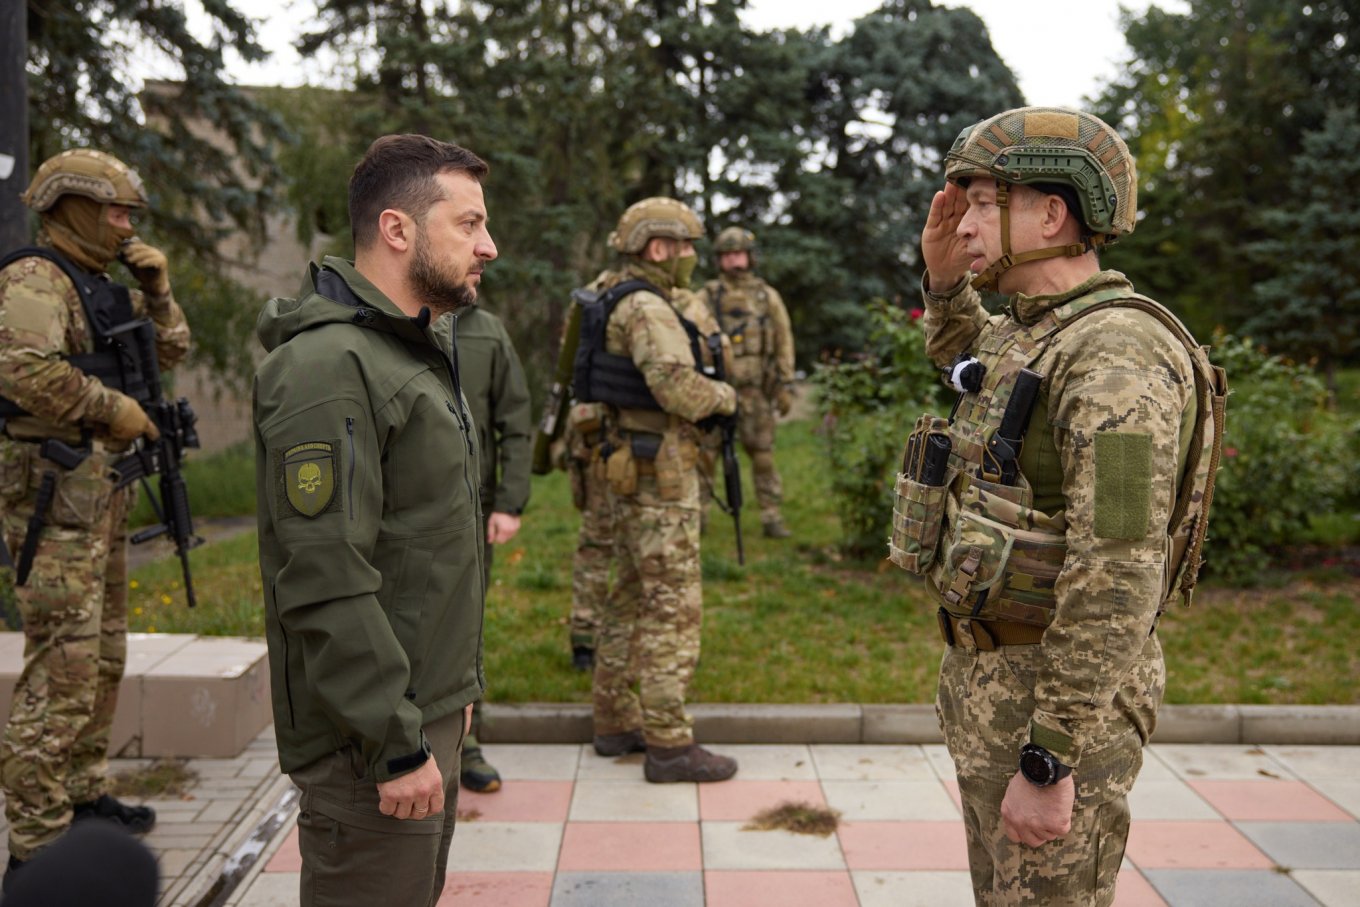 The President accepts the report of Commander of the Ground Forces of the Armed Forces of Ukraine colonel general Oleksandr Syrskyi, who is the architect of successful Kharkiv counteroffensive operation likewise was leading the defense of the capital of Ukraine Kyiv city, Defense Express